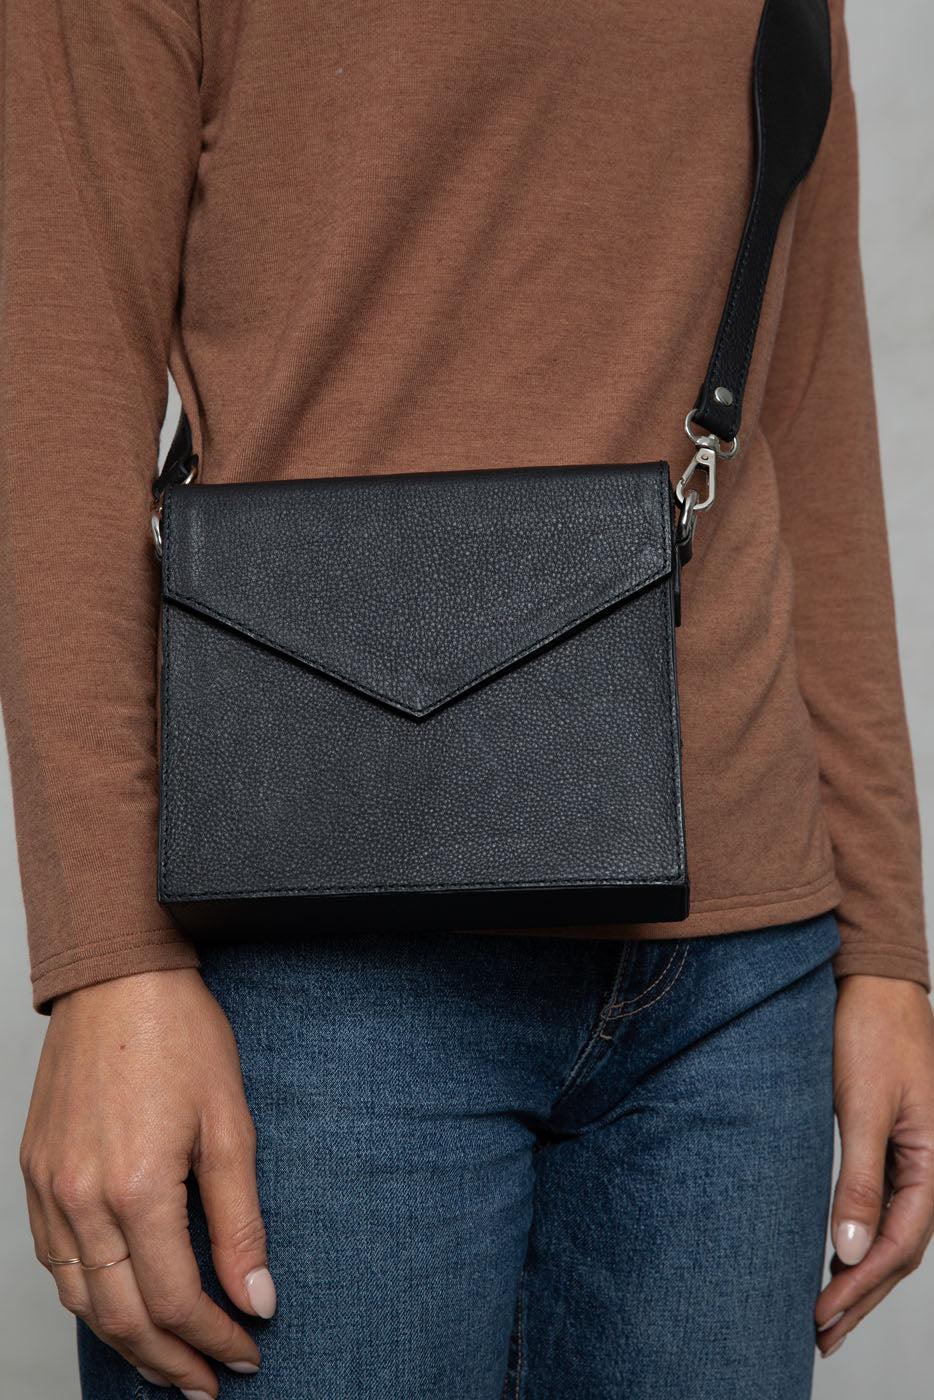 Mailbox Shoulder Bag - Black-Bags & Clutches-Holiday-The Bay Room